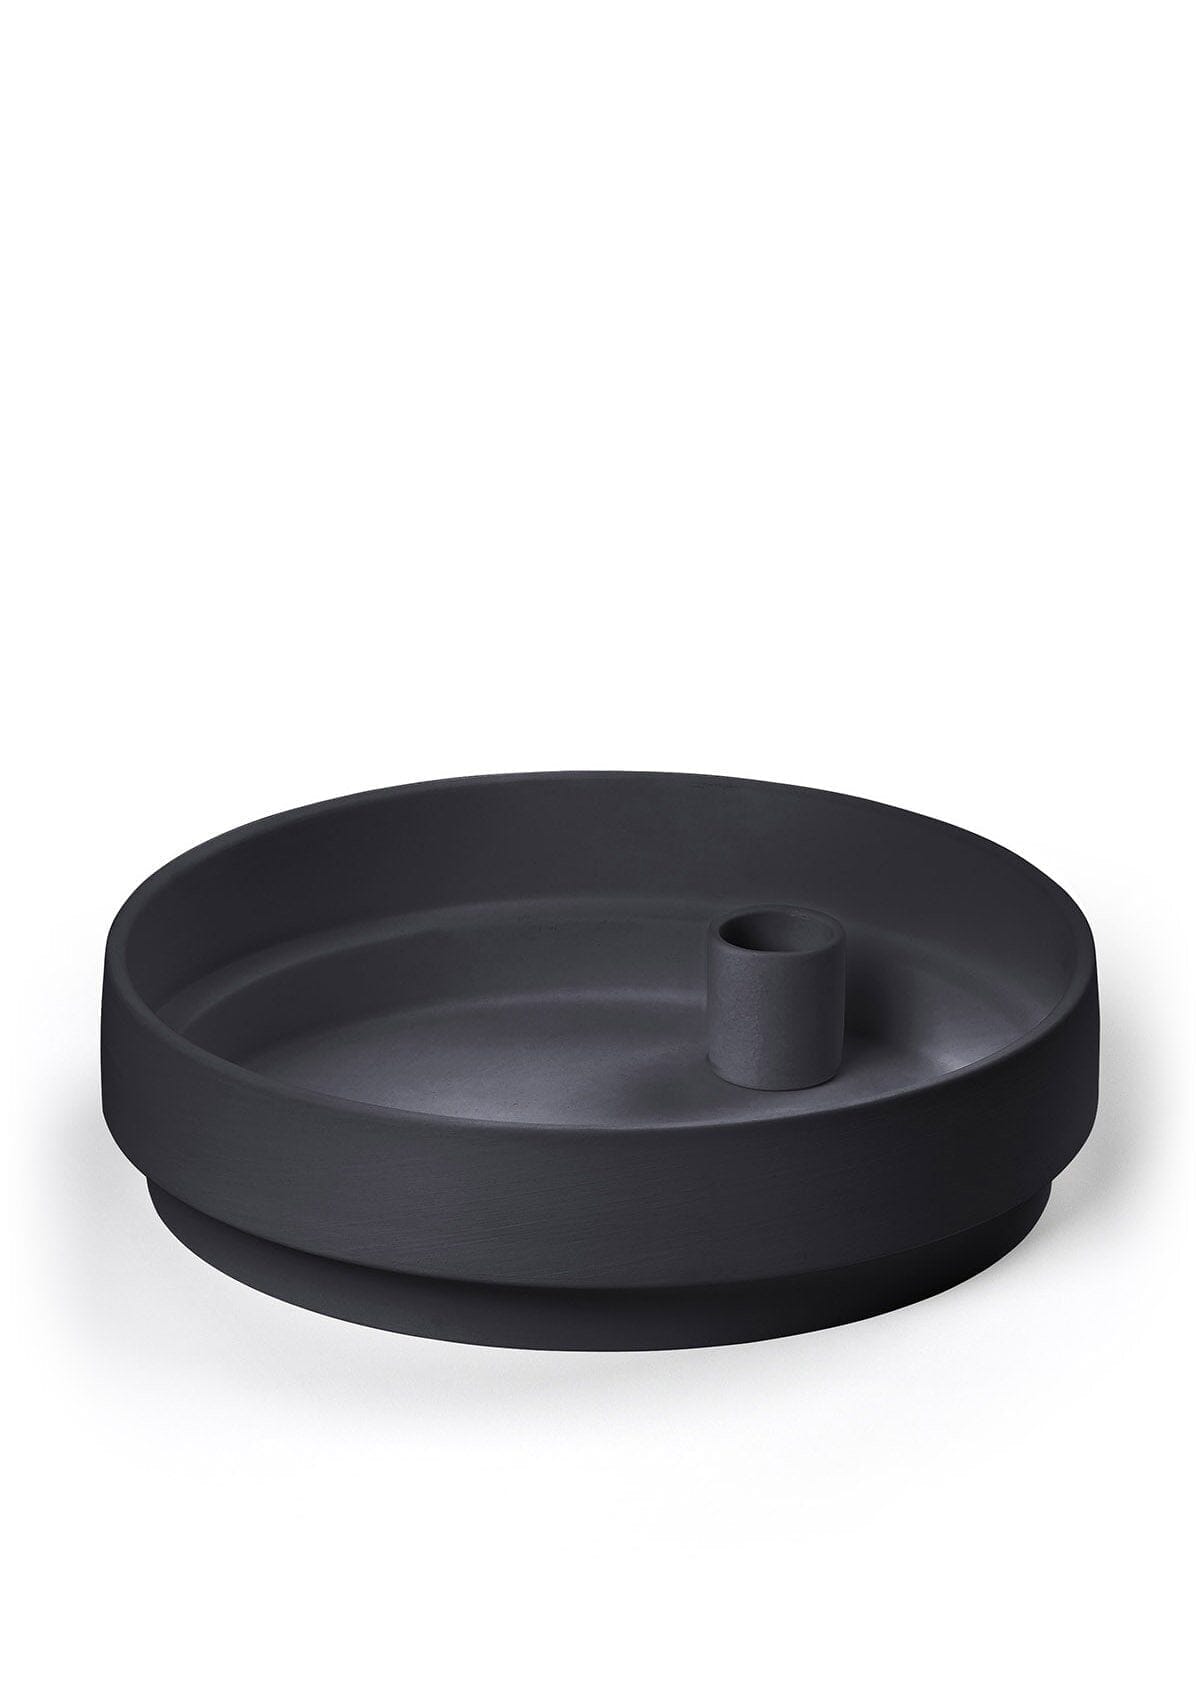 Orbital Step Charcoal Grey Candle Holder in Matte Clay - Large